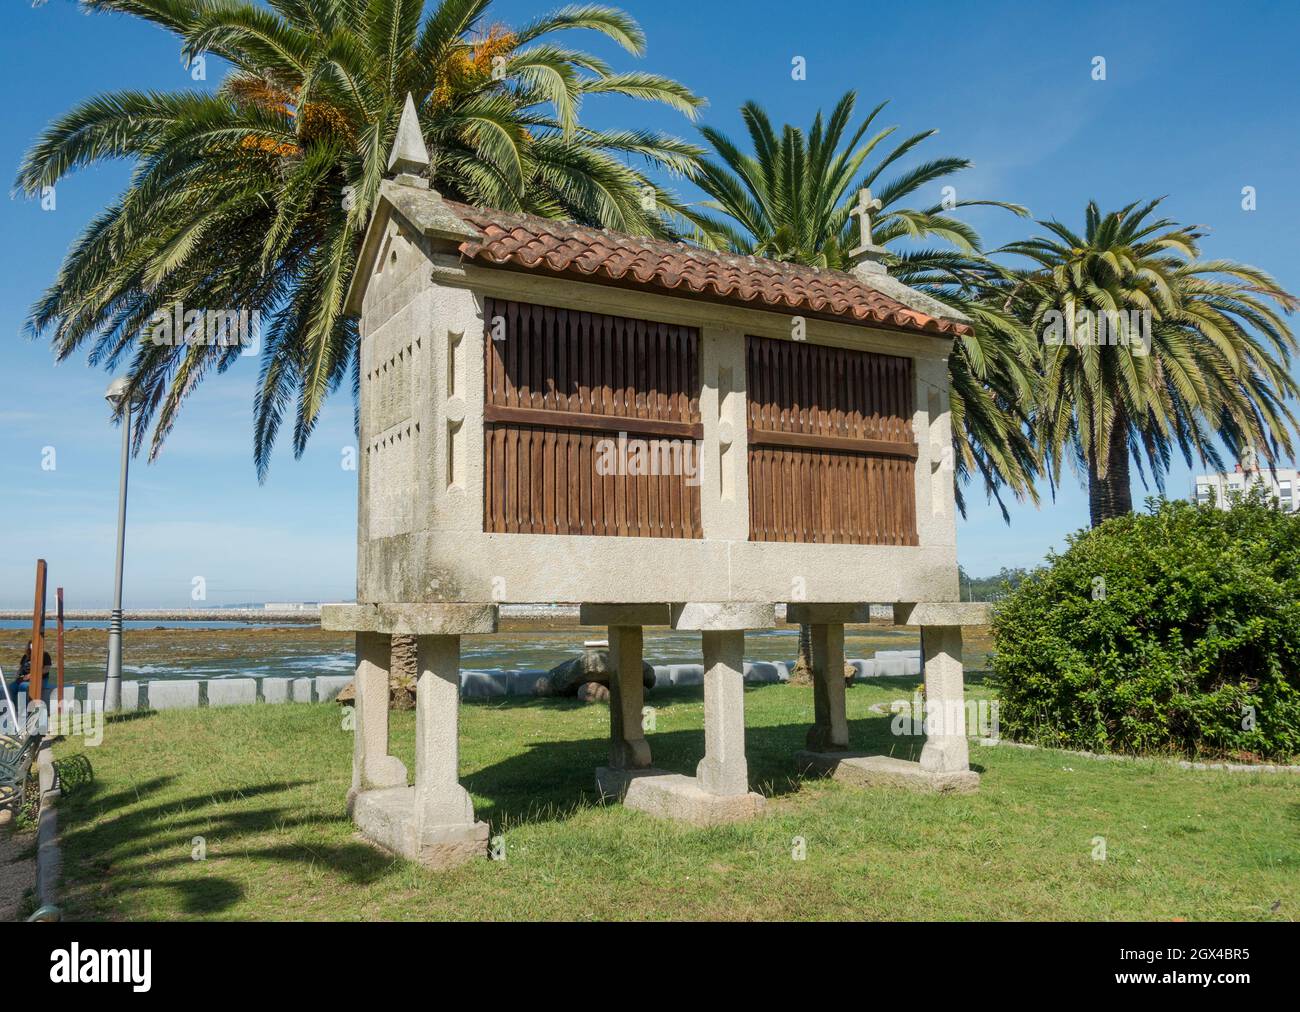 Typical old Galician granary (horreo) to protect fruits and corn harvest in the old town of Cambados, Pontevedra, Spain. Stock Photo